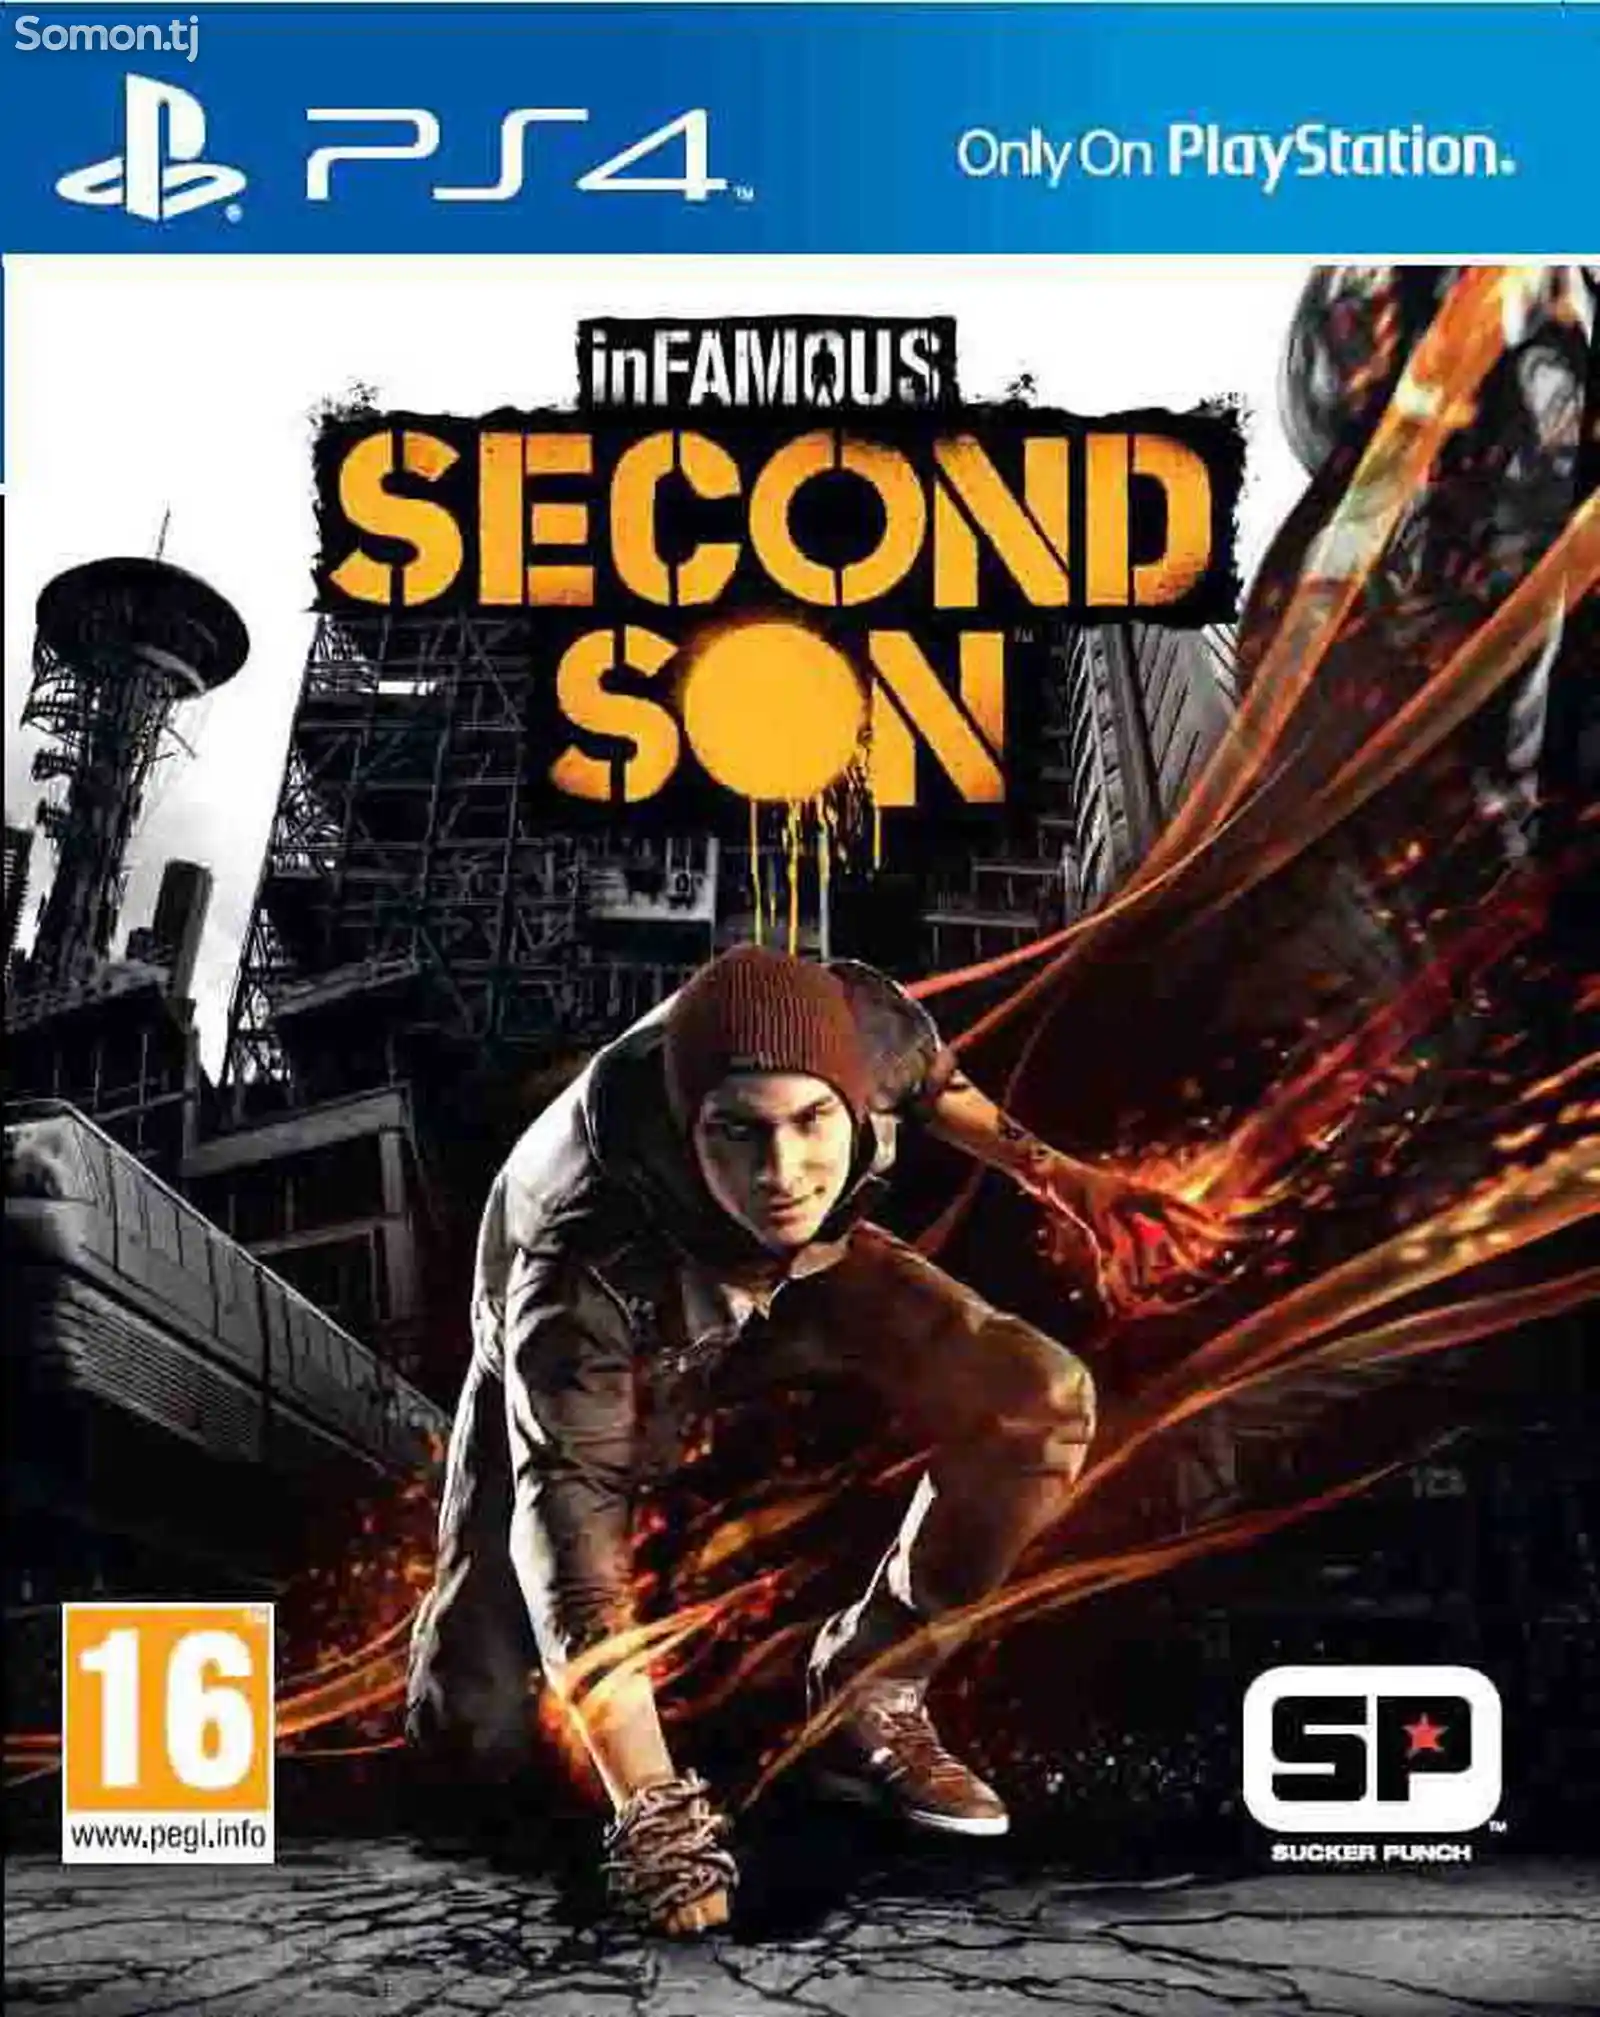 Игра In Famous second son для PS-4 / 5.05 / 6.72 / 7.02 / 7.55 / 9.00 /